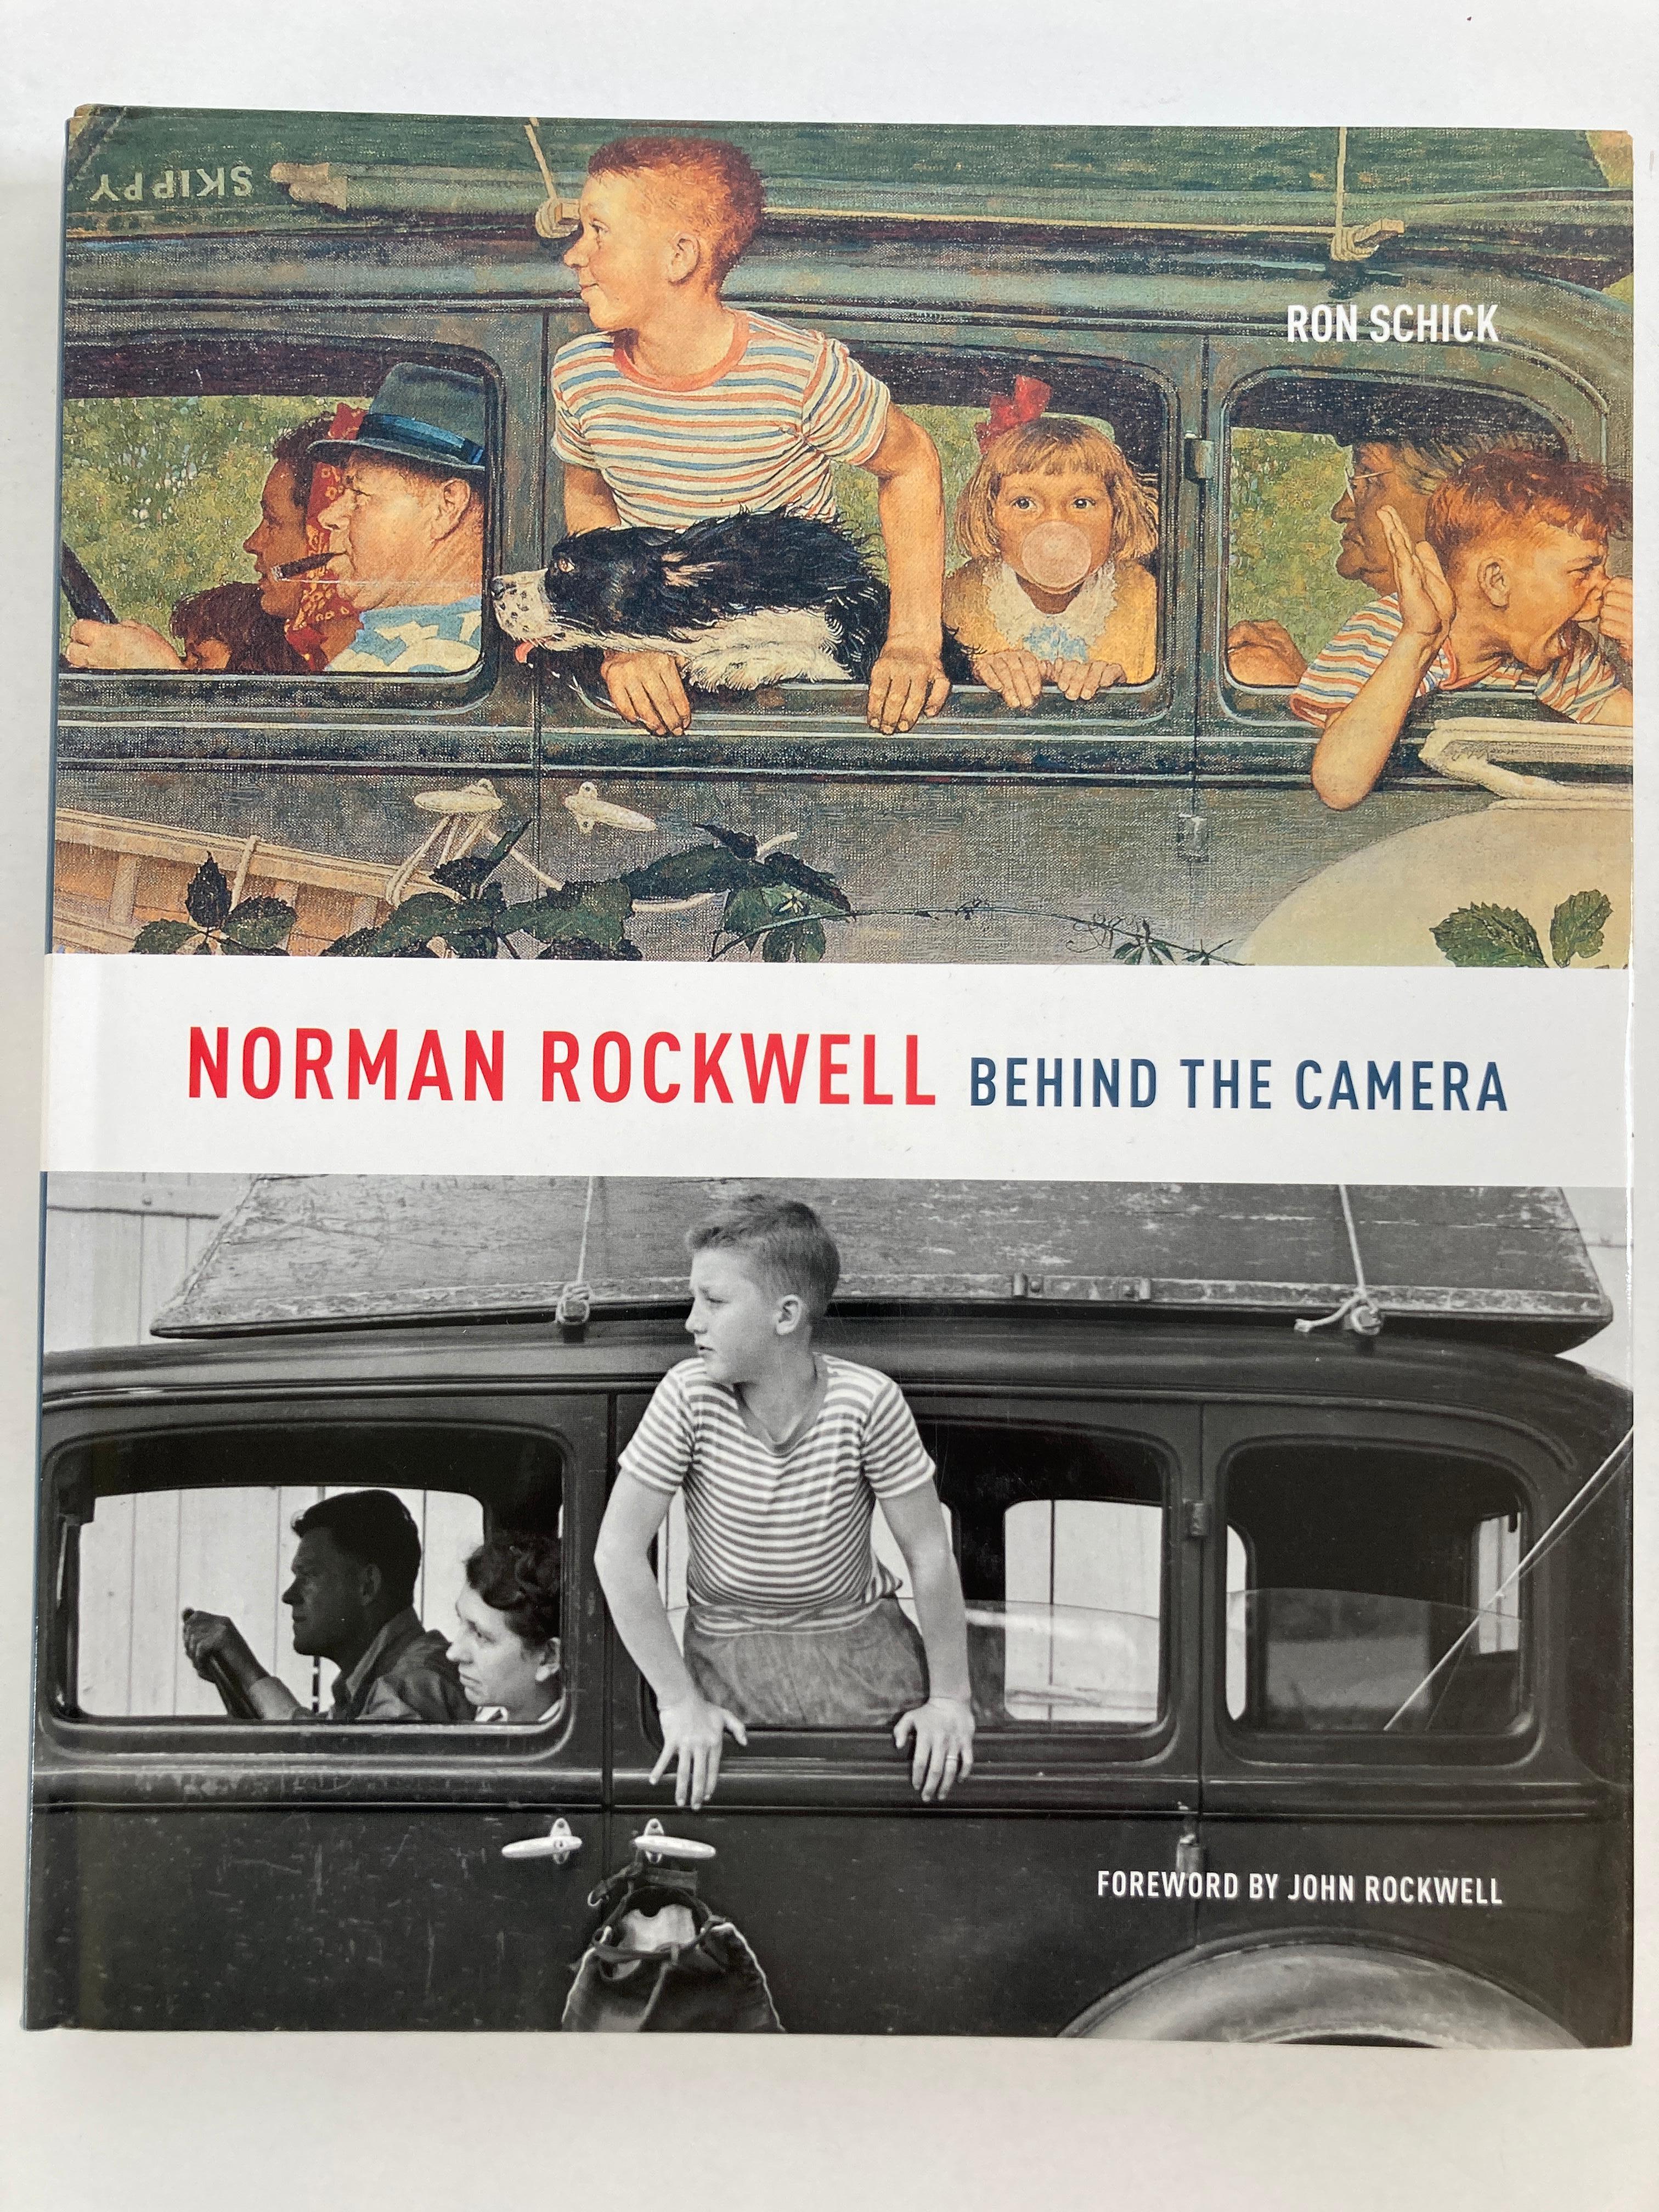 Norman Rockwell: Behind the Camera hardcover book by Norman Rockwell and Ron Schick.
This is a beautiful large coffee table book
Norman Rockwell: Behind the Camera is the first book to explore the meticulously composed and richly detailed